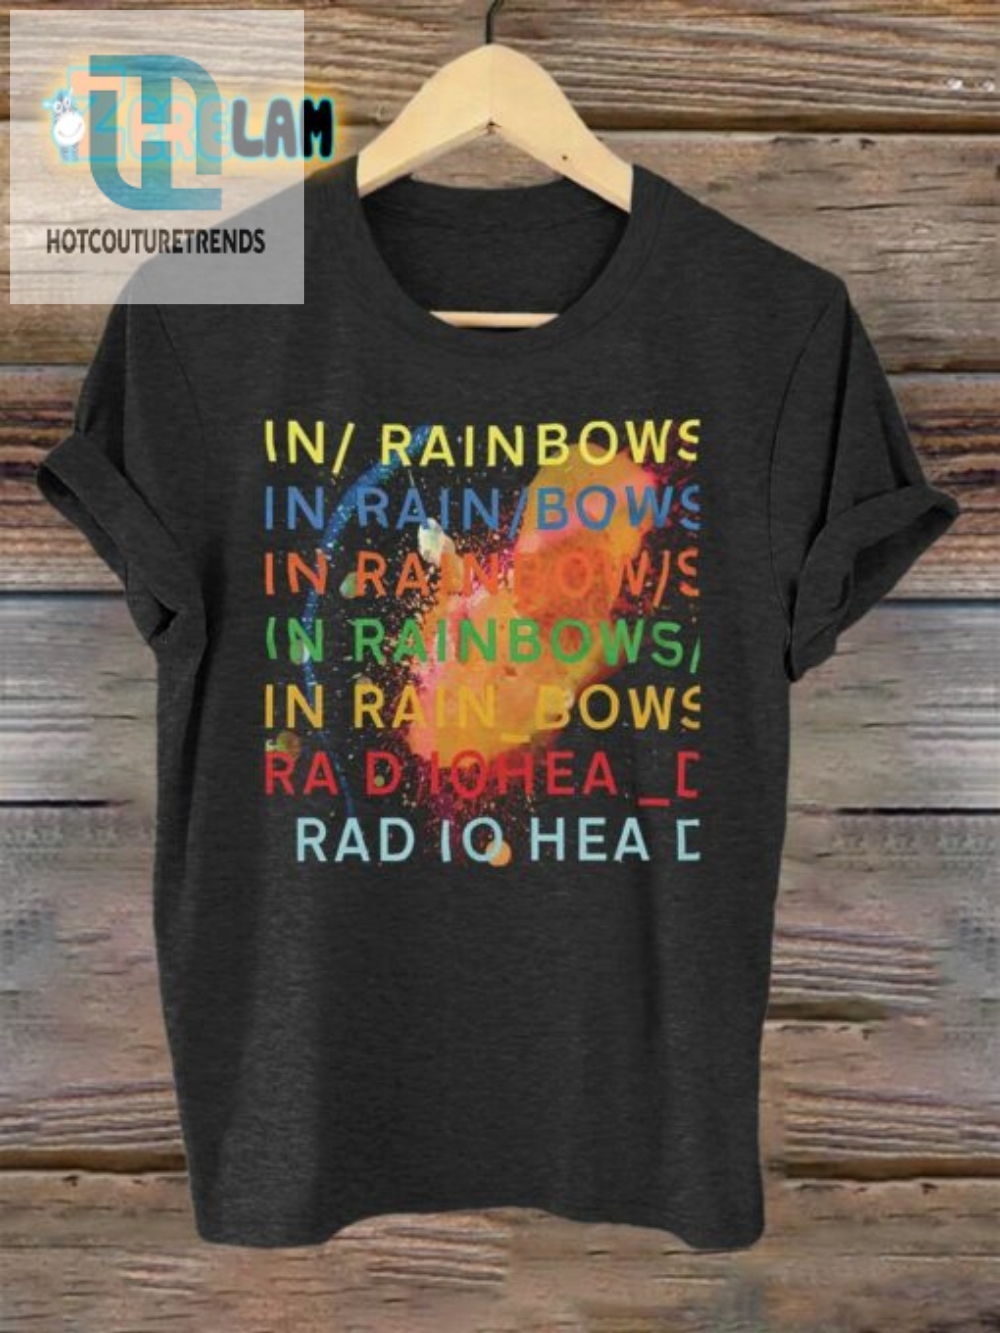 Get Your Rock On With This Radiohead In Rainbows Tee